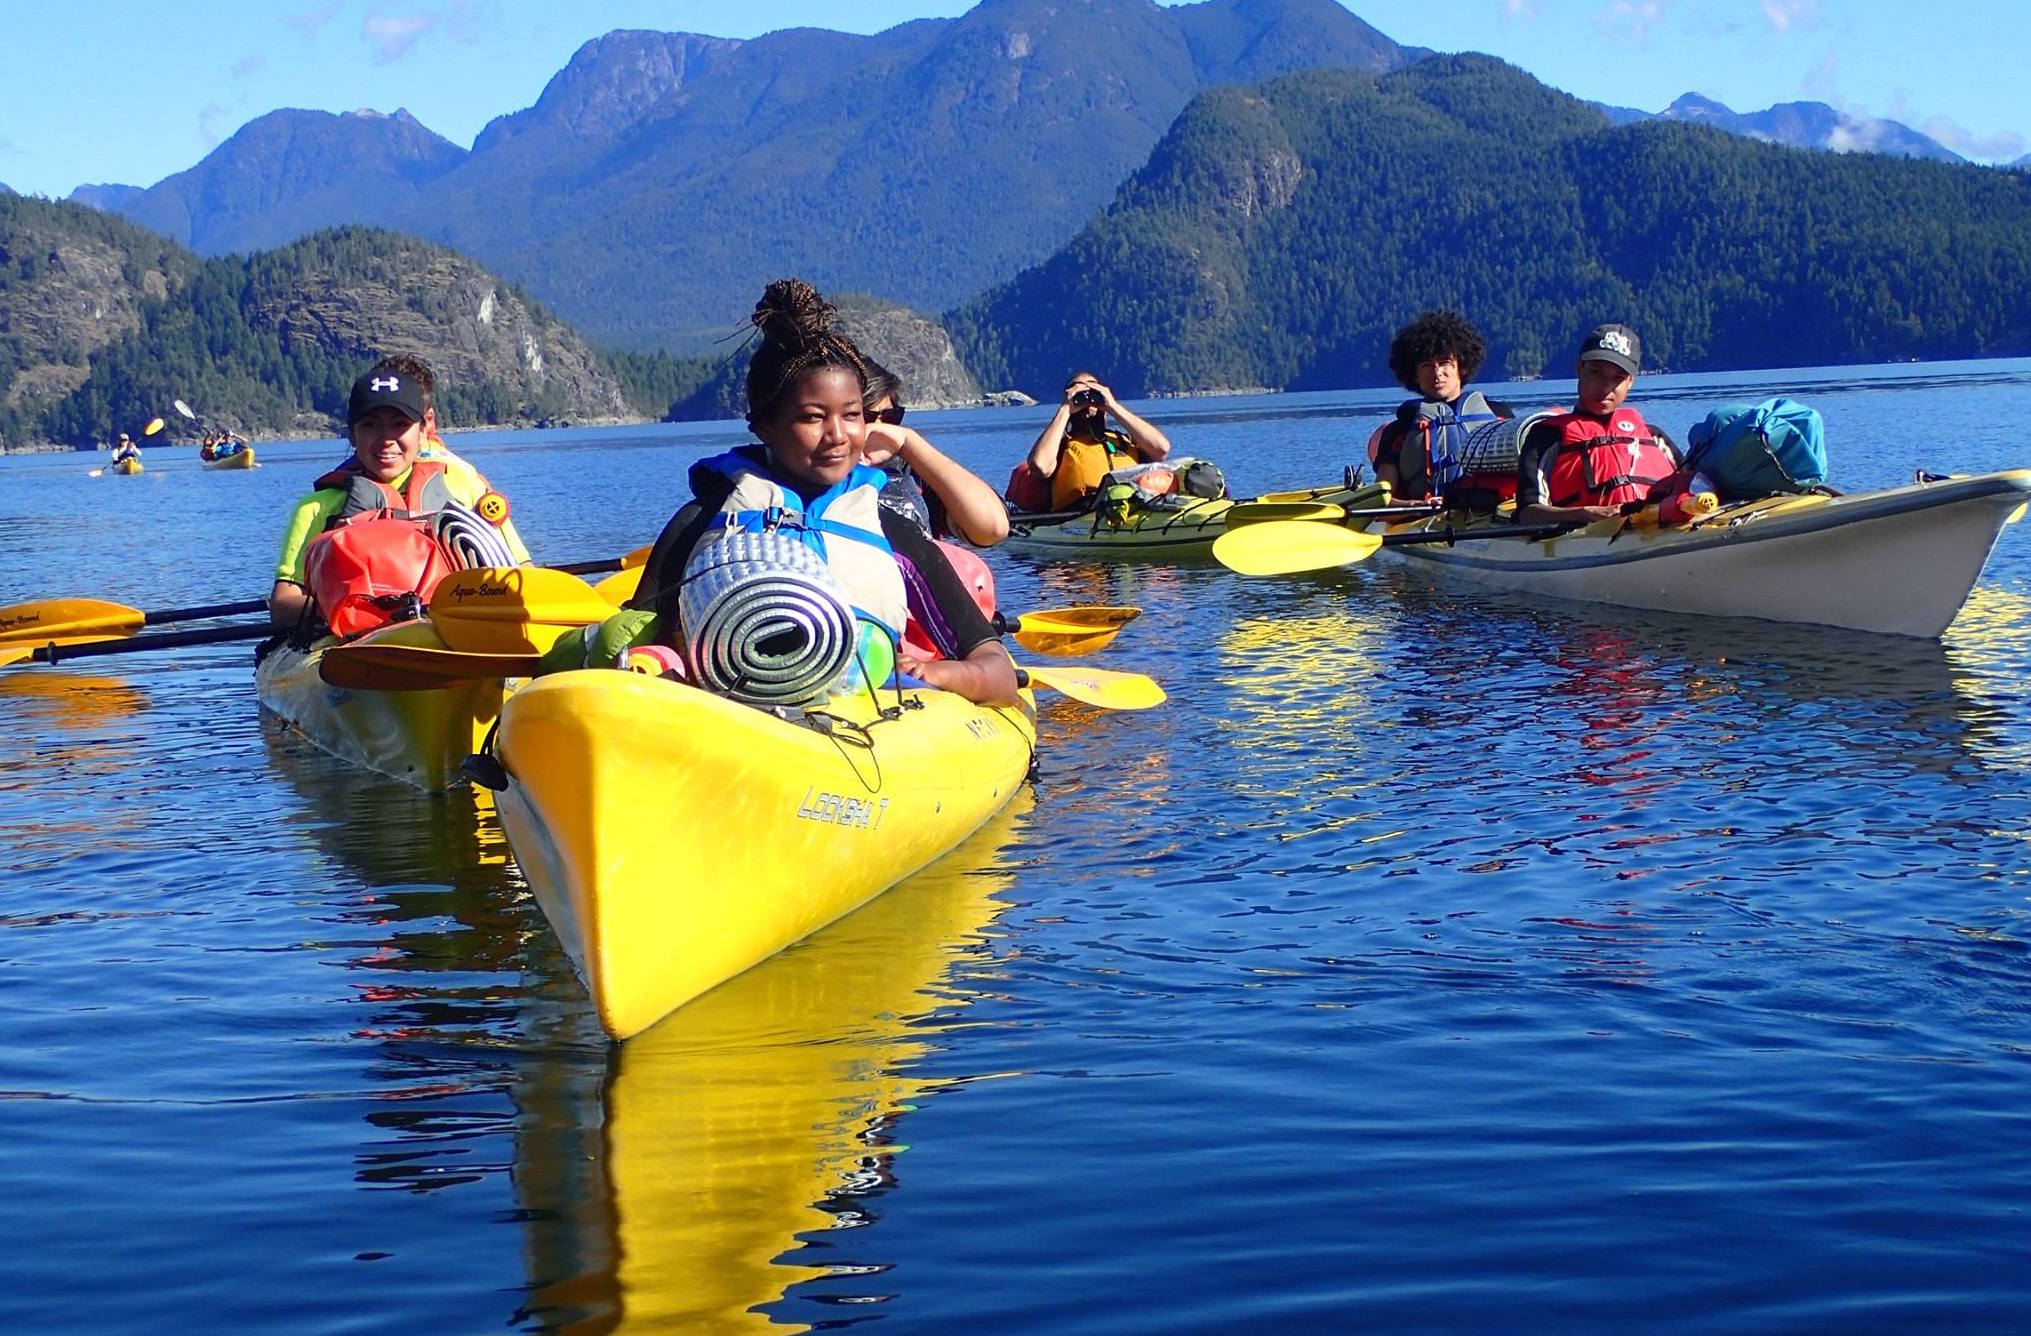 A group of young people kayaking on a lake.